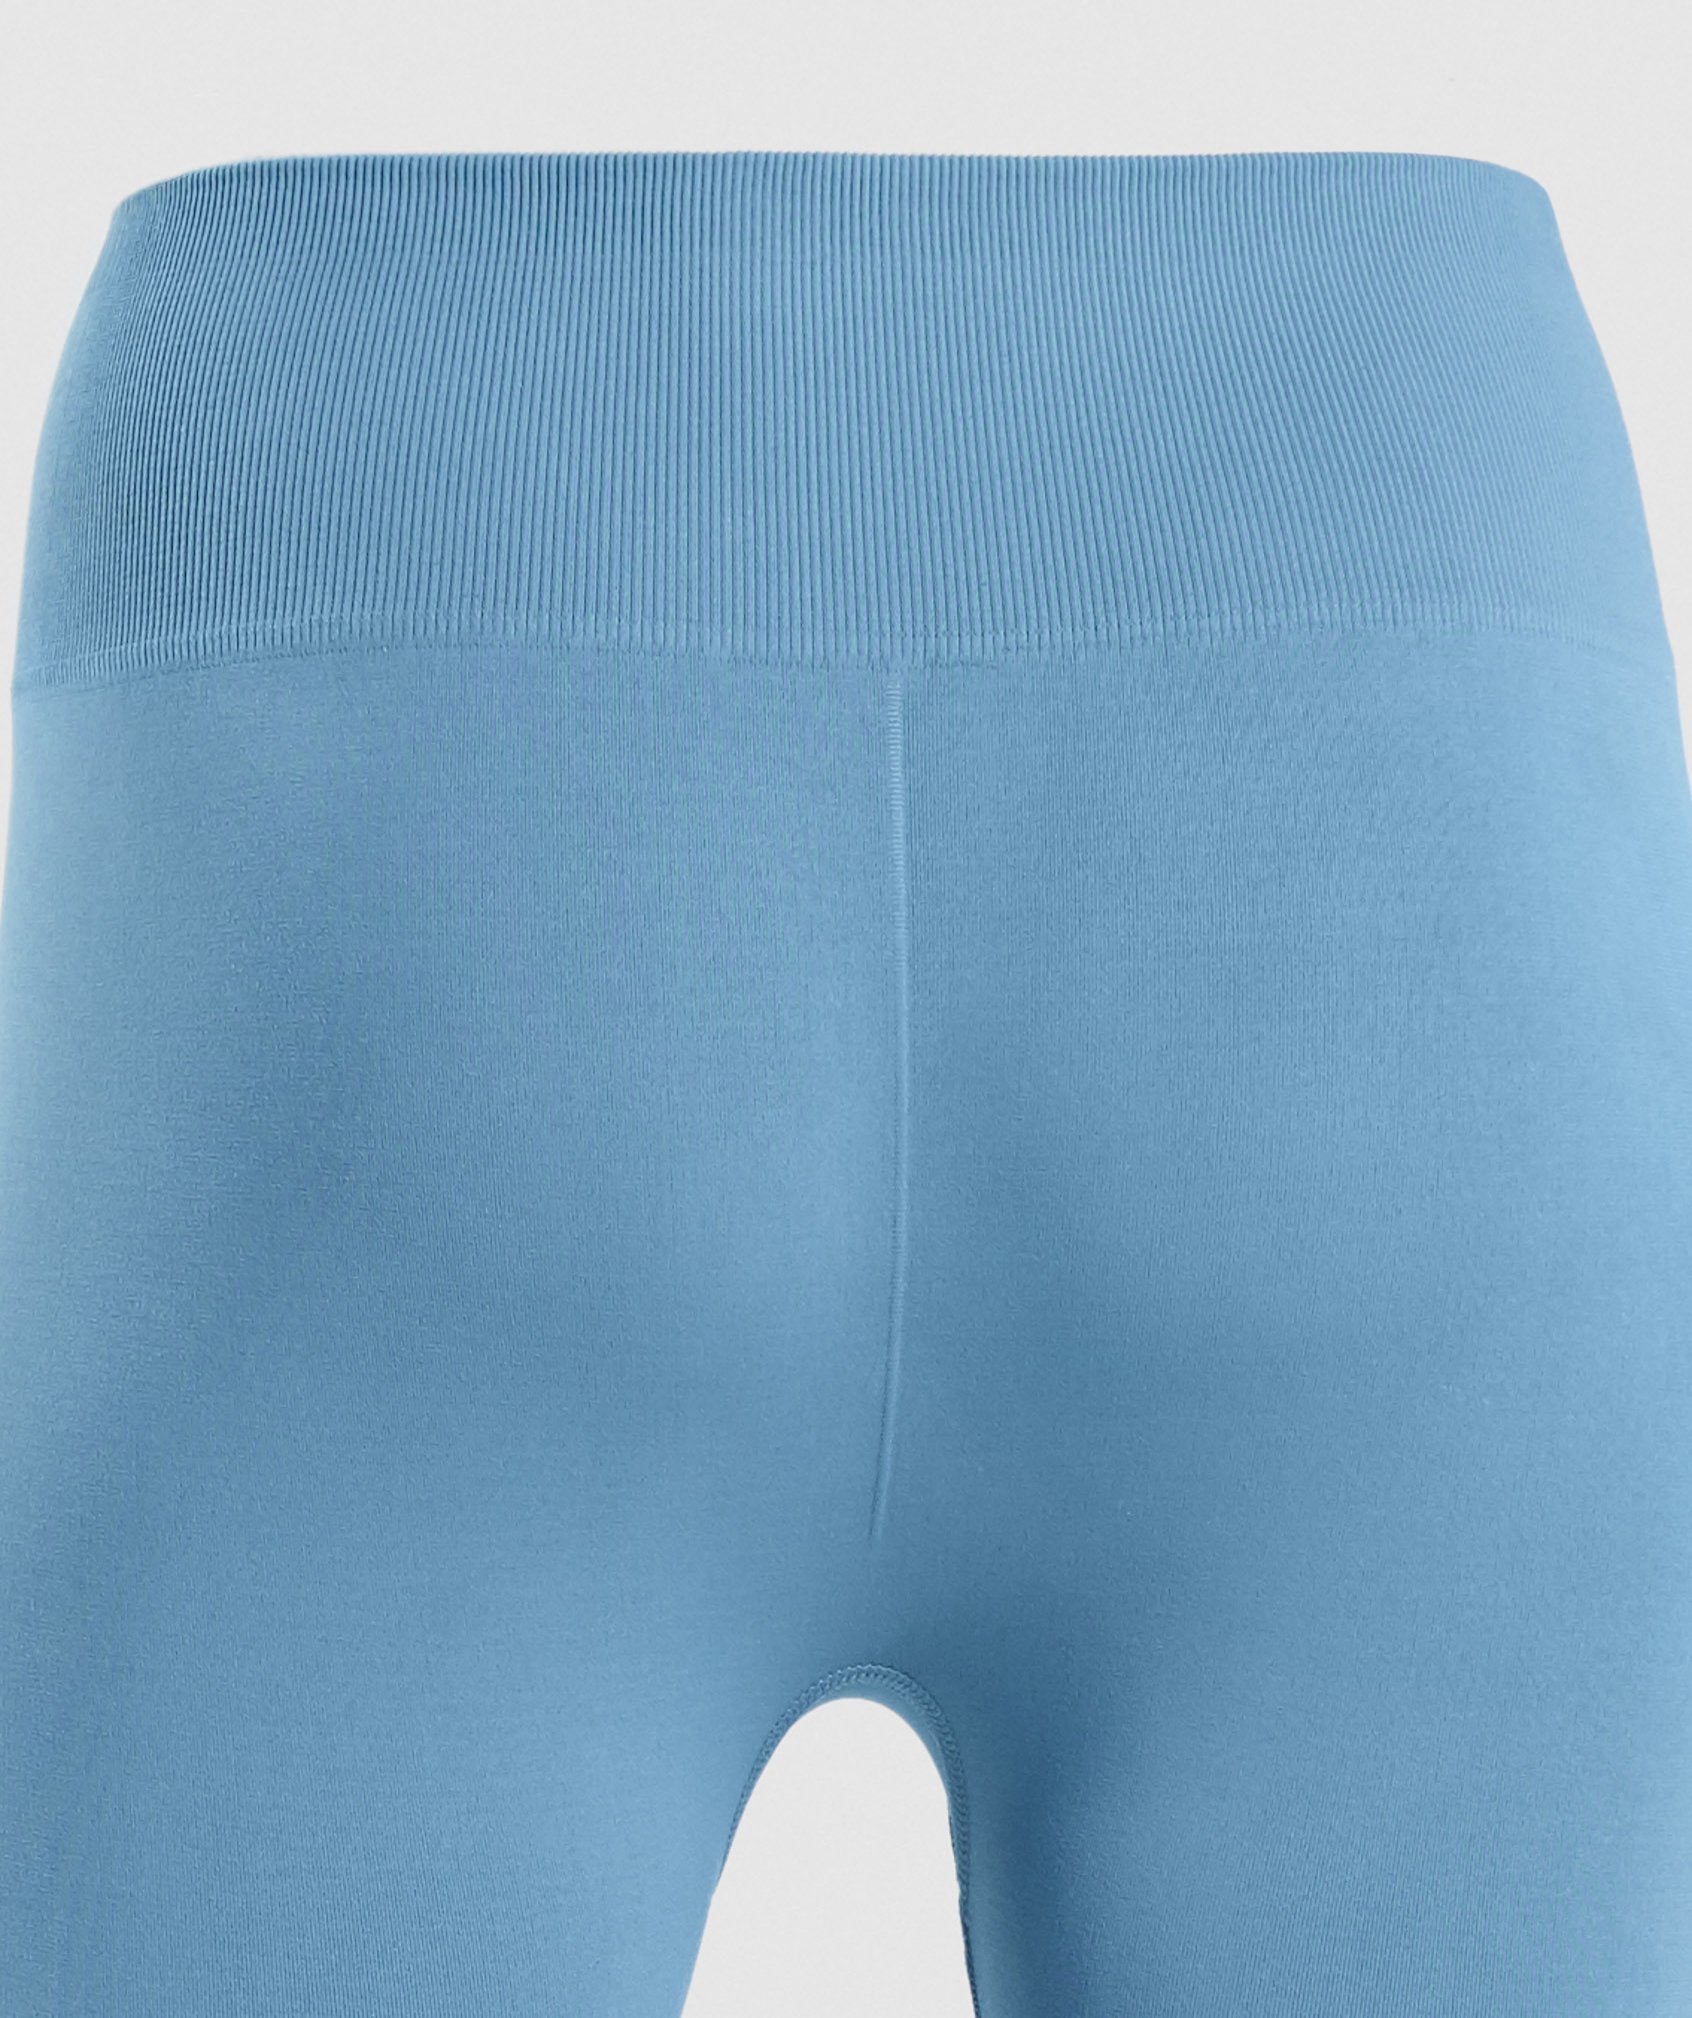 Breeze Lightweight Seamless Tights in Blue Stone - view 5